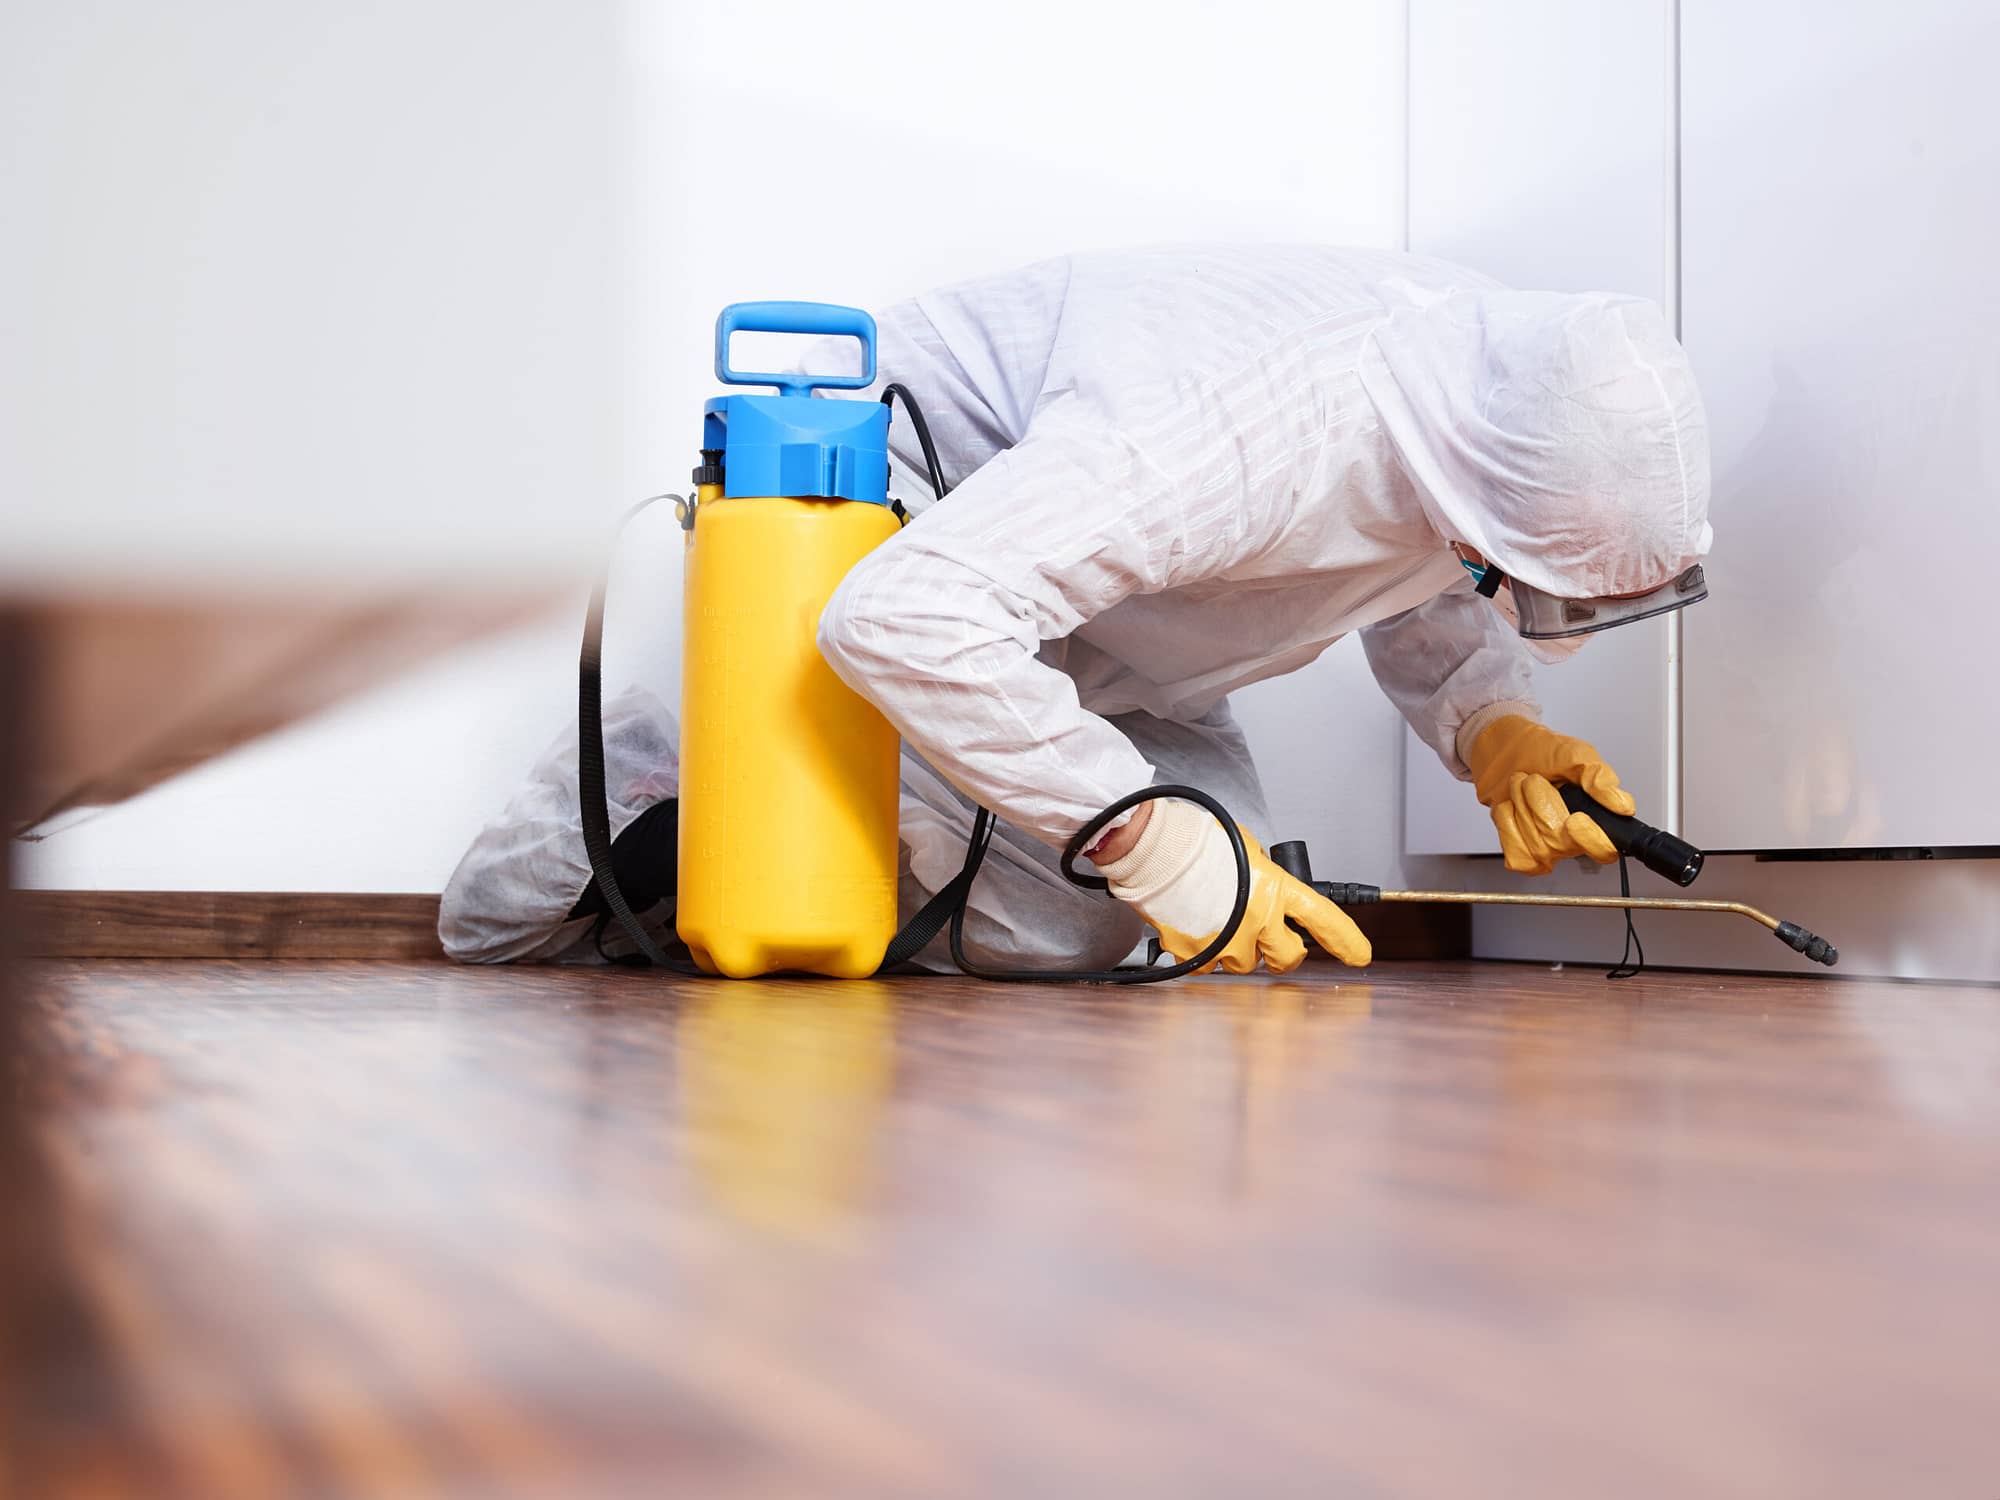 Exterminator in PPE gear spraying treatment near a baseboard - expertise in every spray. Enhance your online presence as effectively as a thorough treatment protects your client's home.